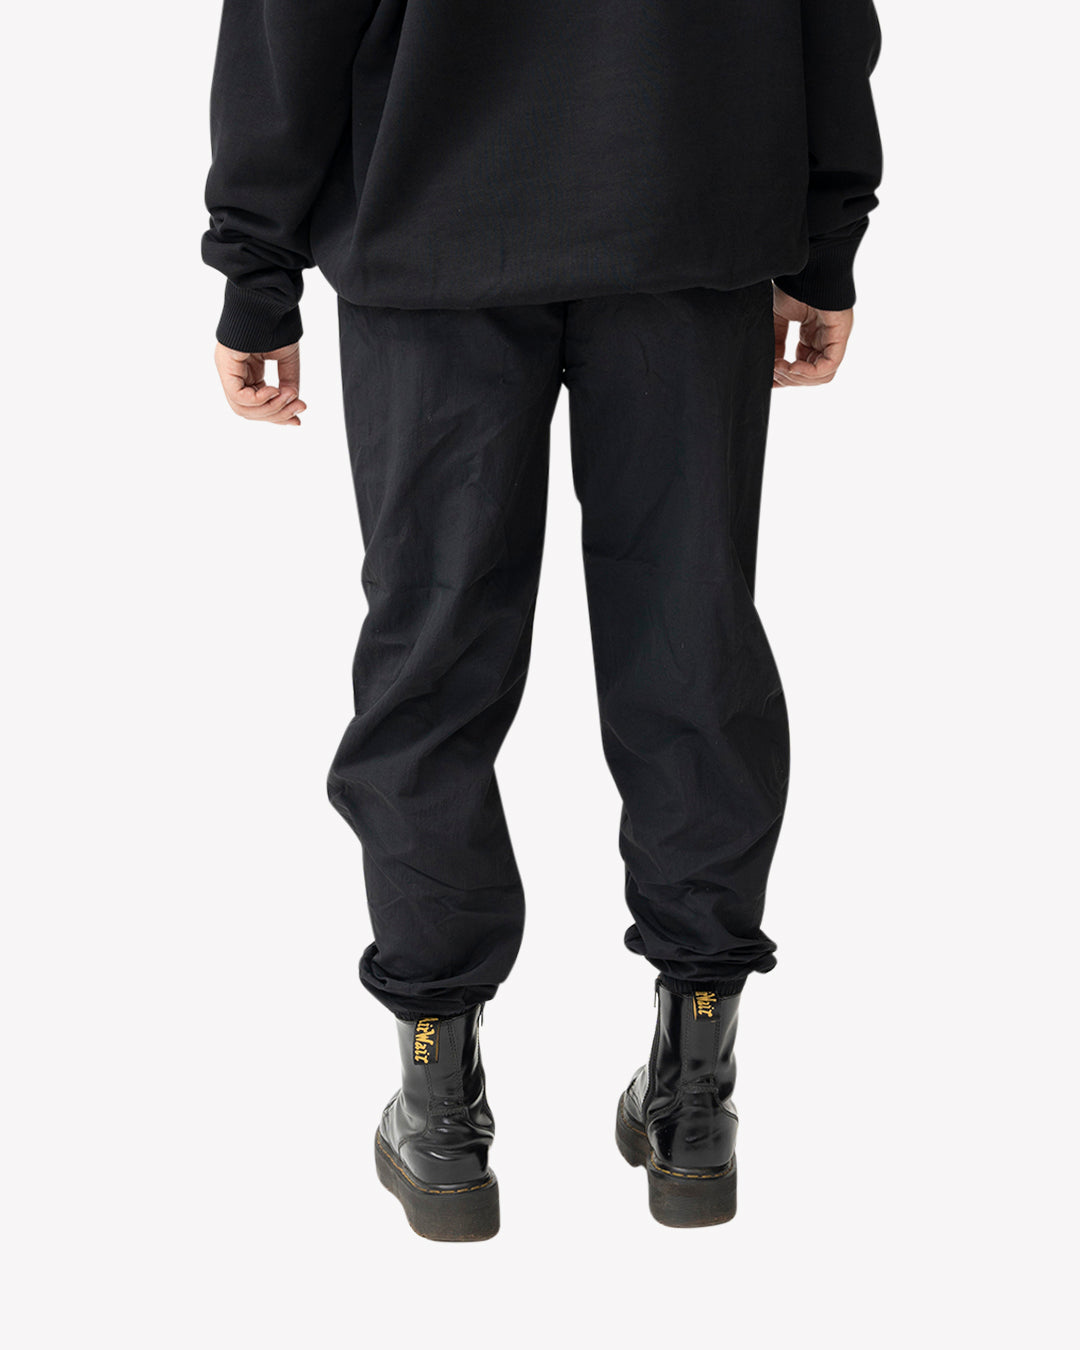 Rave Tracker Trousers Black | Customized Culture